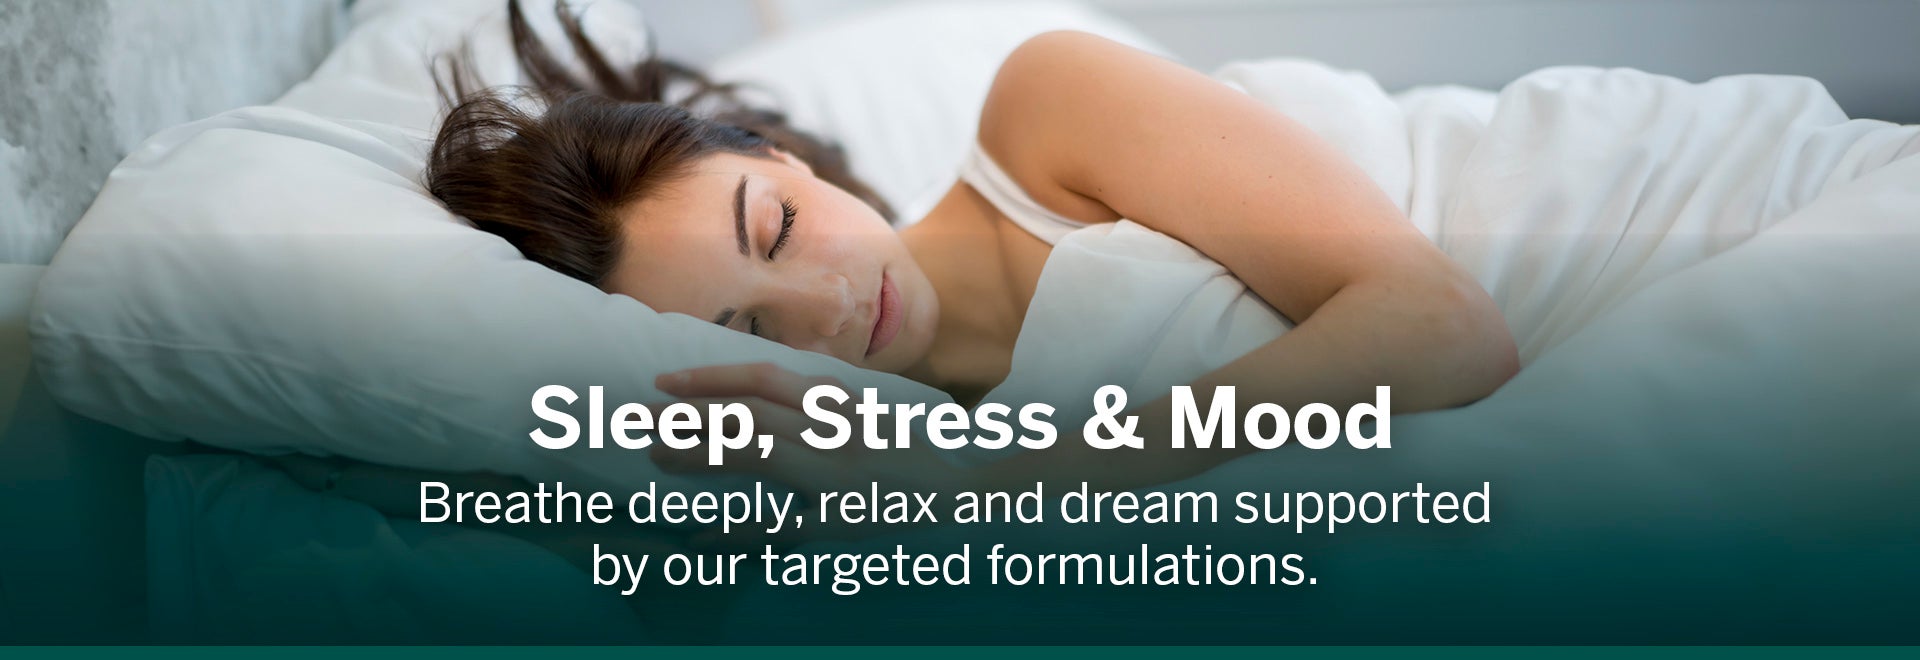 Women sleeping with text written on the image syaing sleep, strss and mood. Breathe deeply, relax and dream supported by Genestra’s targeted formulations.